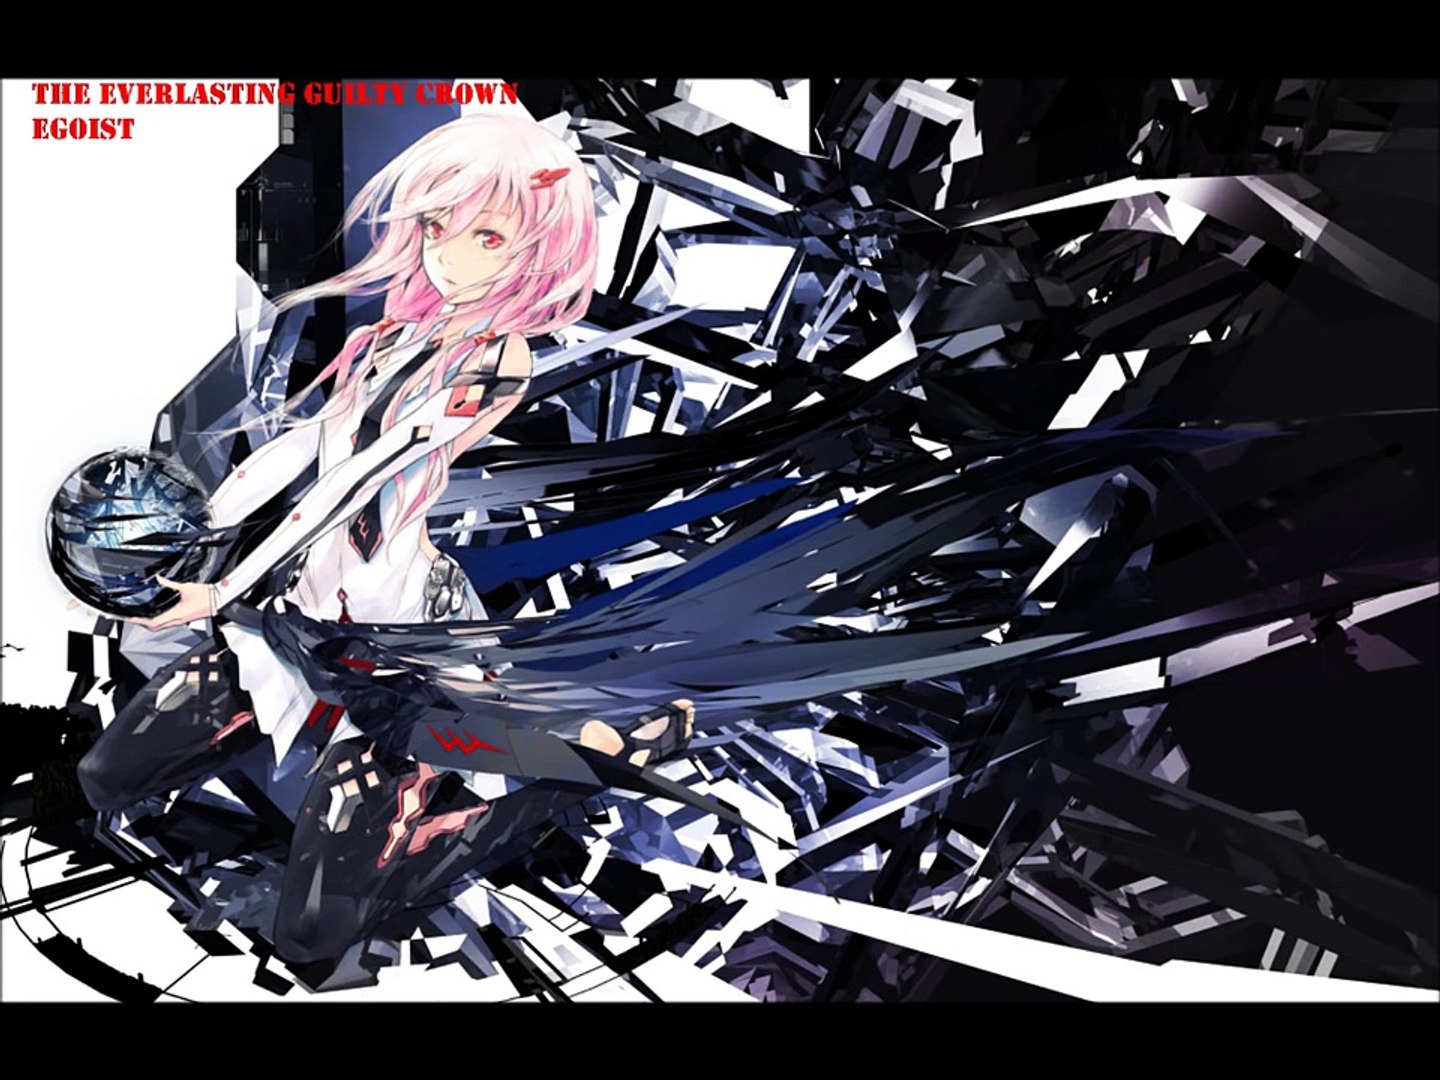 The Everlasting Guilty Crown Video Dailymotion